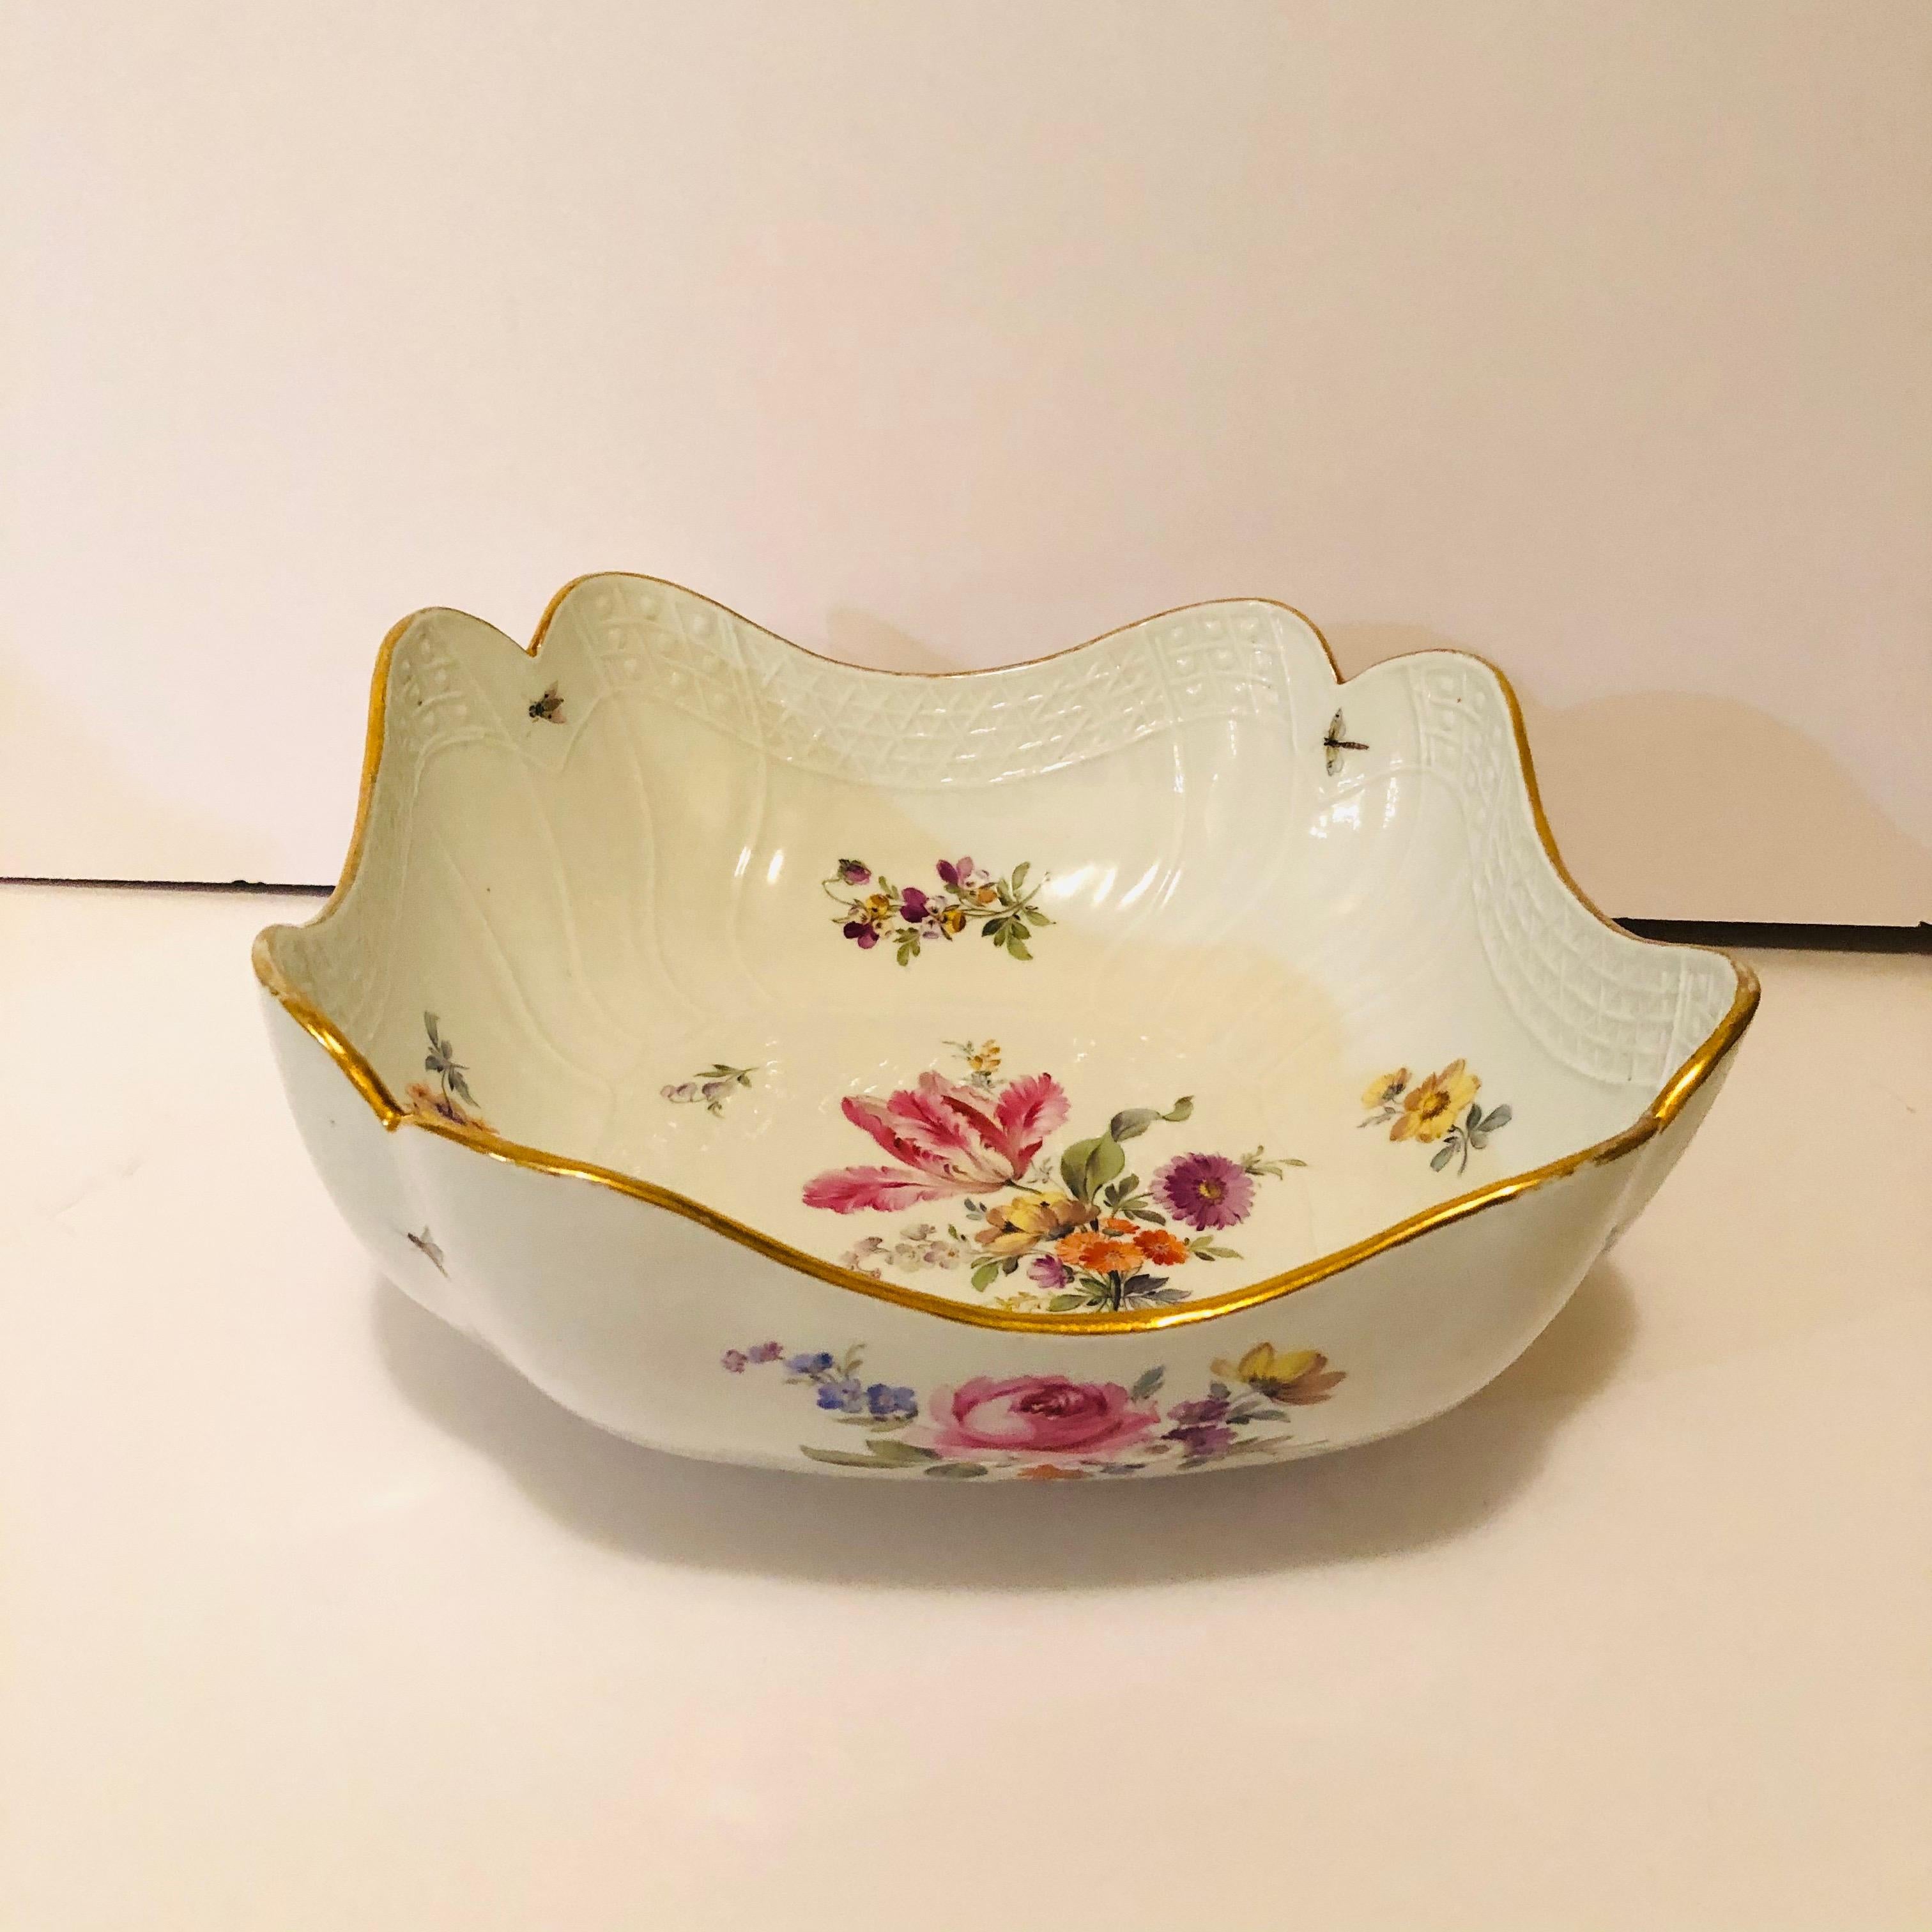 Porcelain Meissen Four Cornered Deep Serving Bowl from the 1880s with Five Flower Bouquets